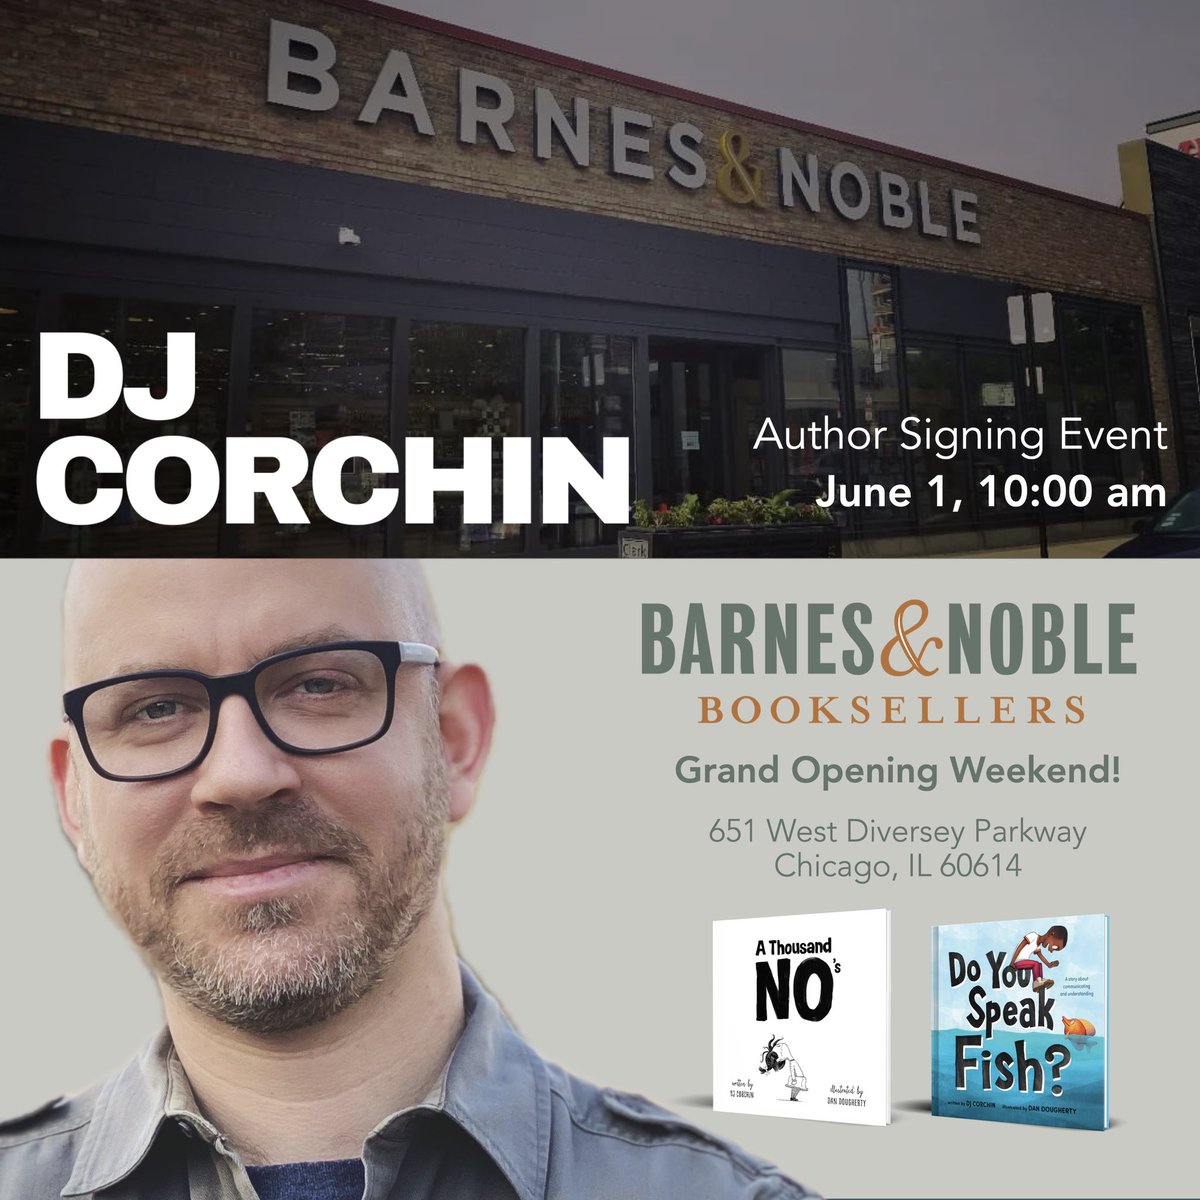 Chicago friends! Join me this Saturday at 10am for a fun author signing event! Help celebrate the opening of a brand new Barnes and Noble right in the heart of Lakeview! stores.barnesandnoble.com/event/97800621… @SourcebooksKids @lizaroyceagency @Beardocomics #authorvisit